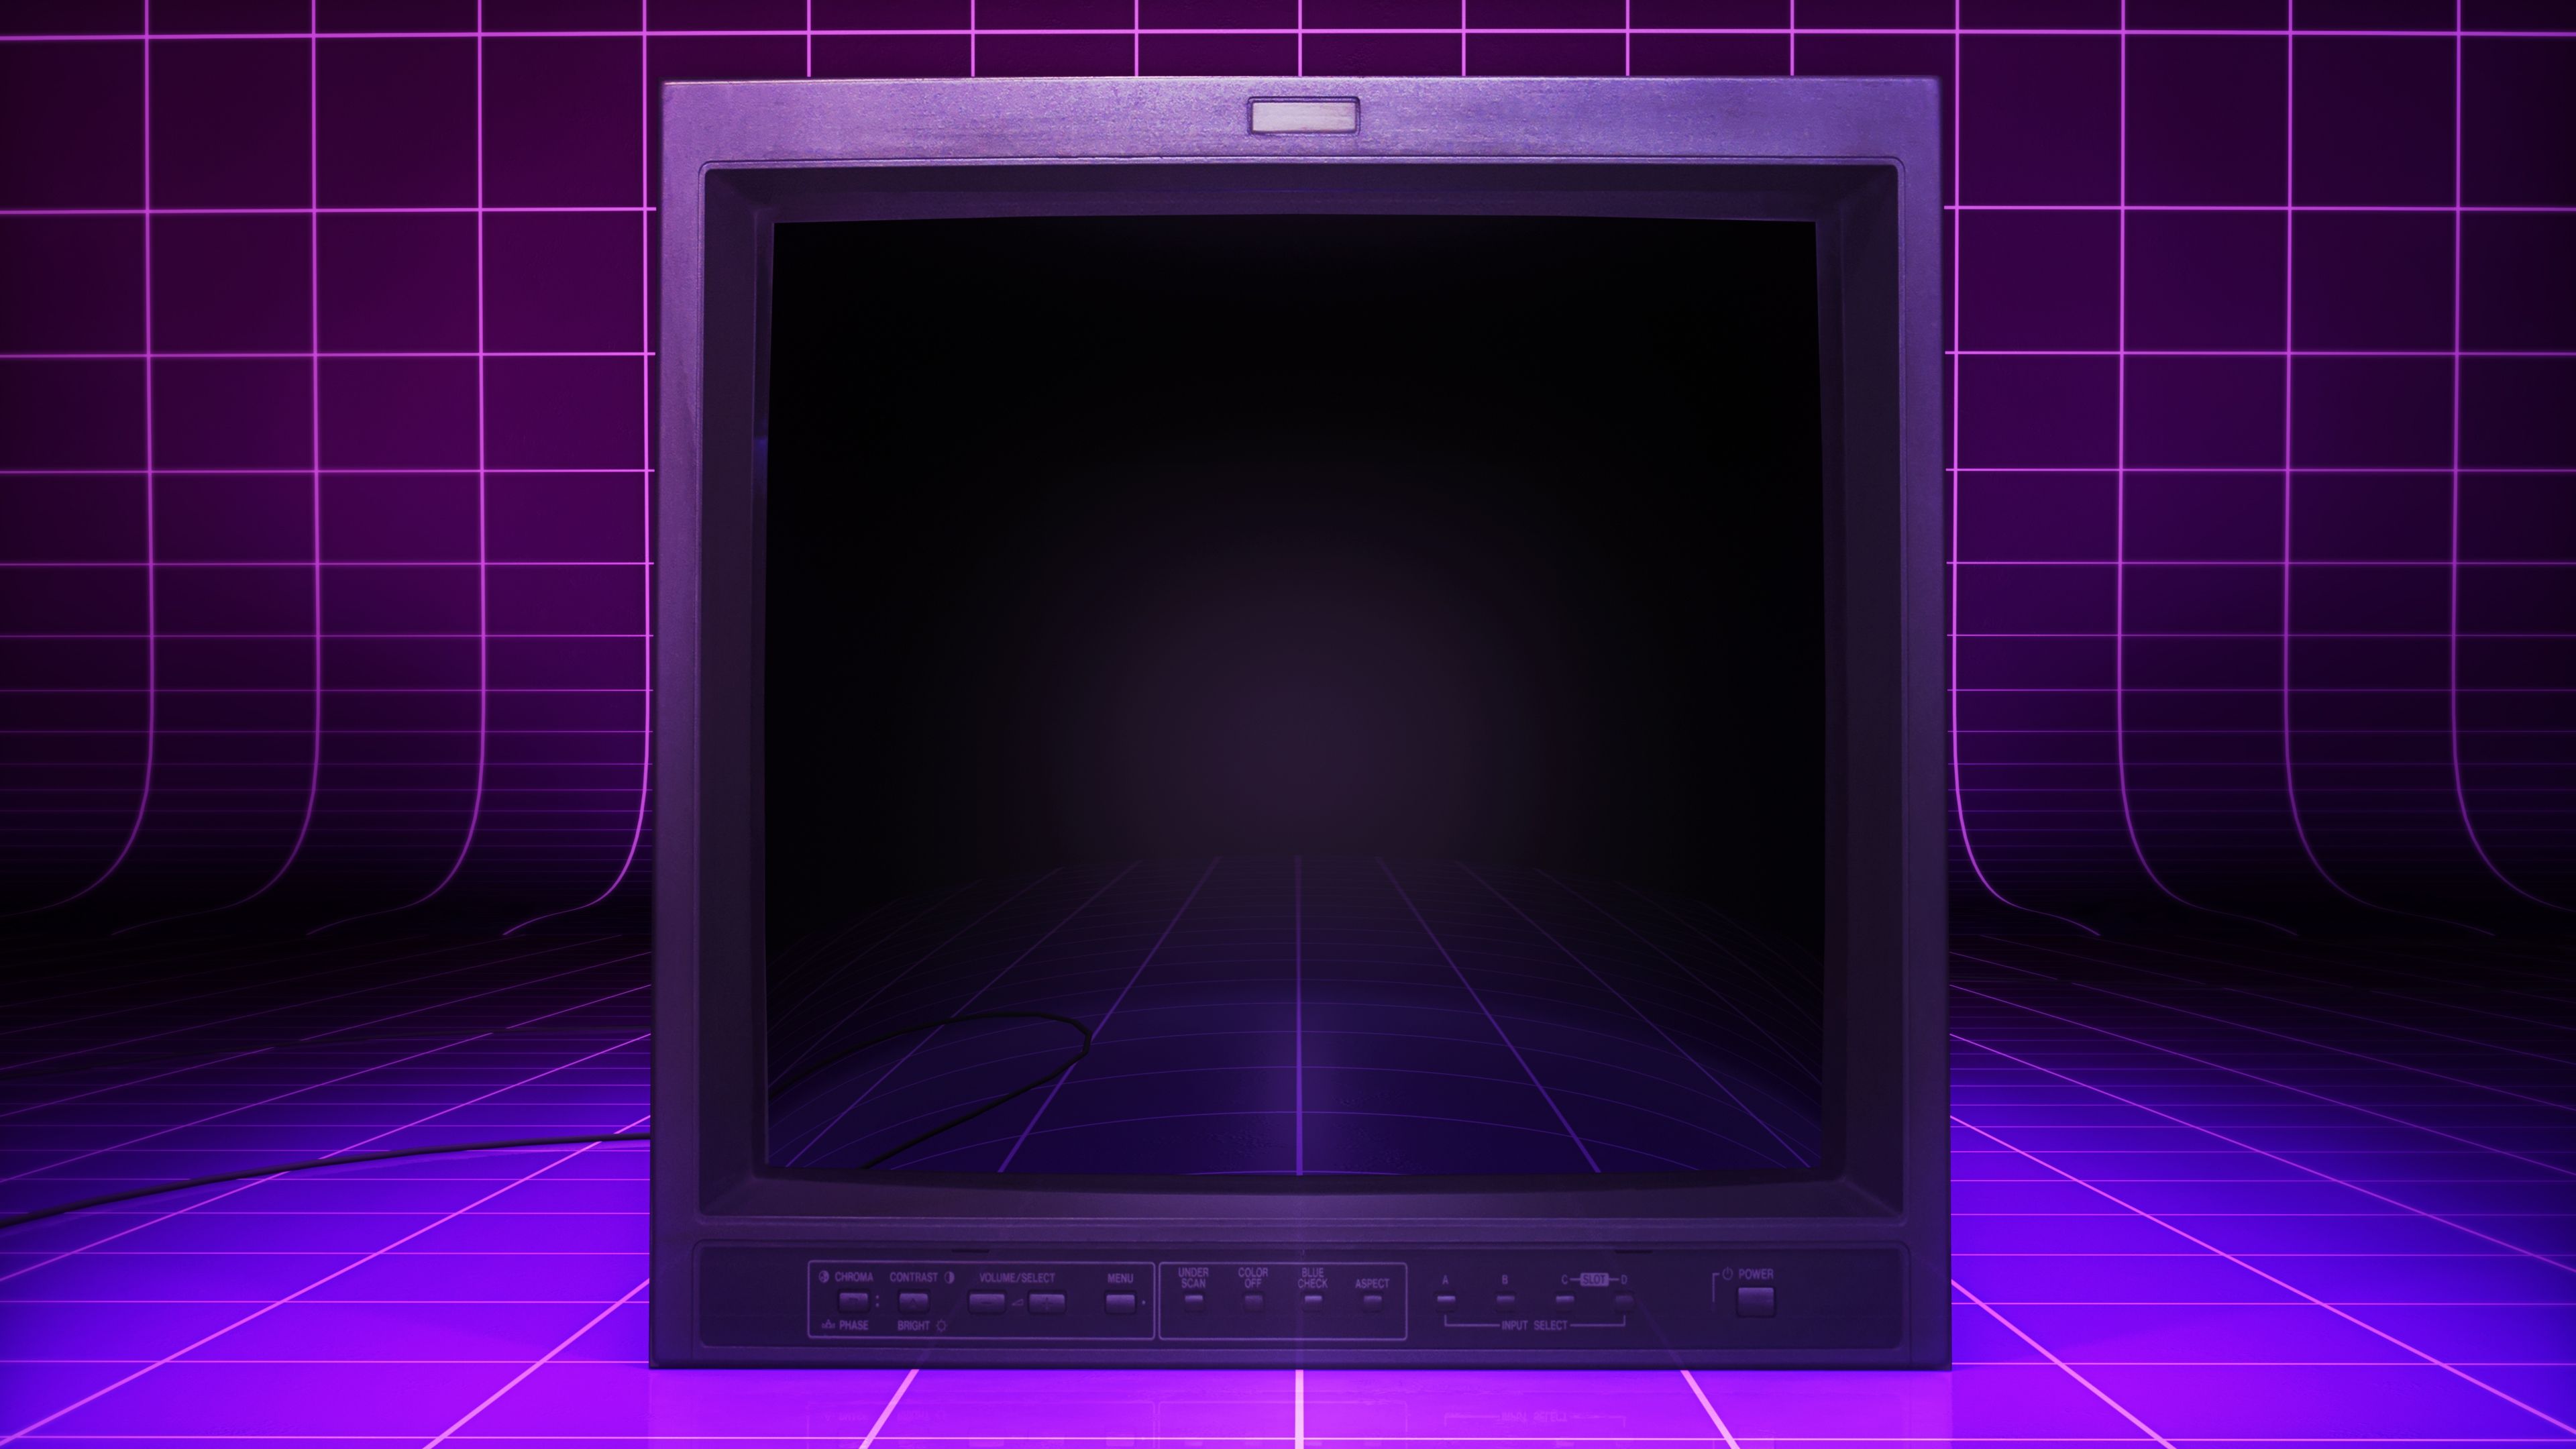 A vintage CRT monitor with a purple retro arcade grid background.